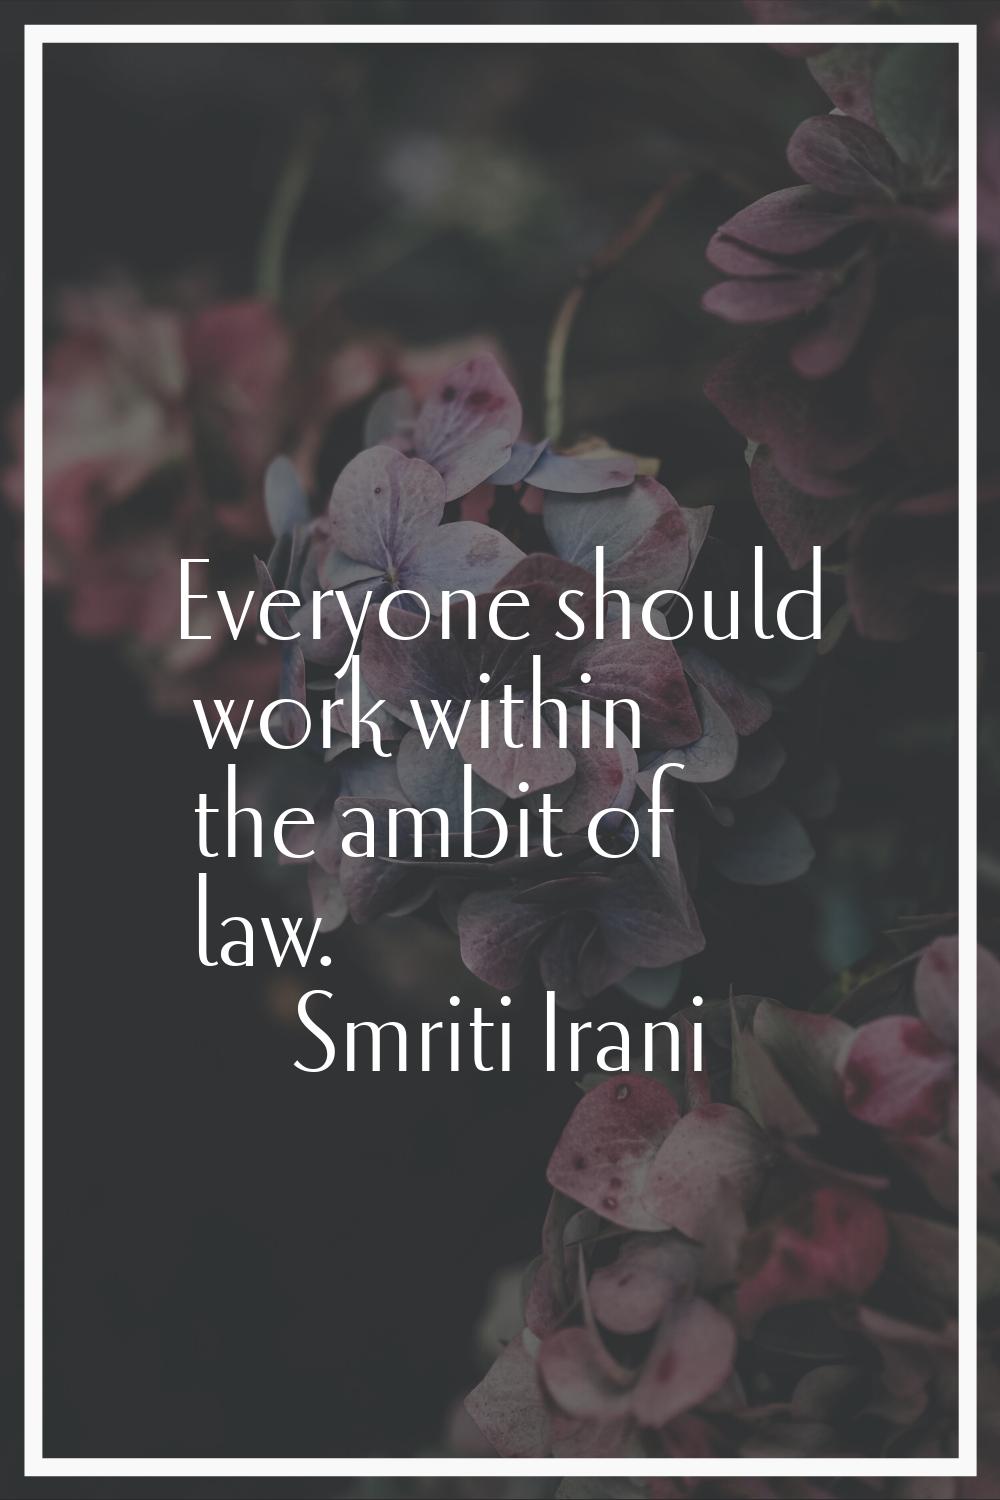 Everyone should work within the ambit of law.